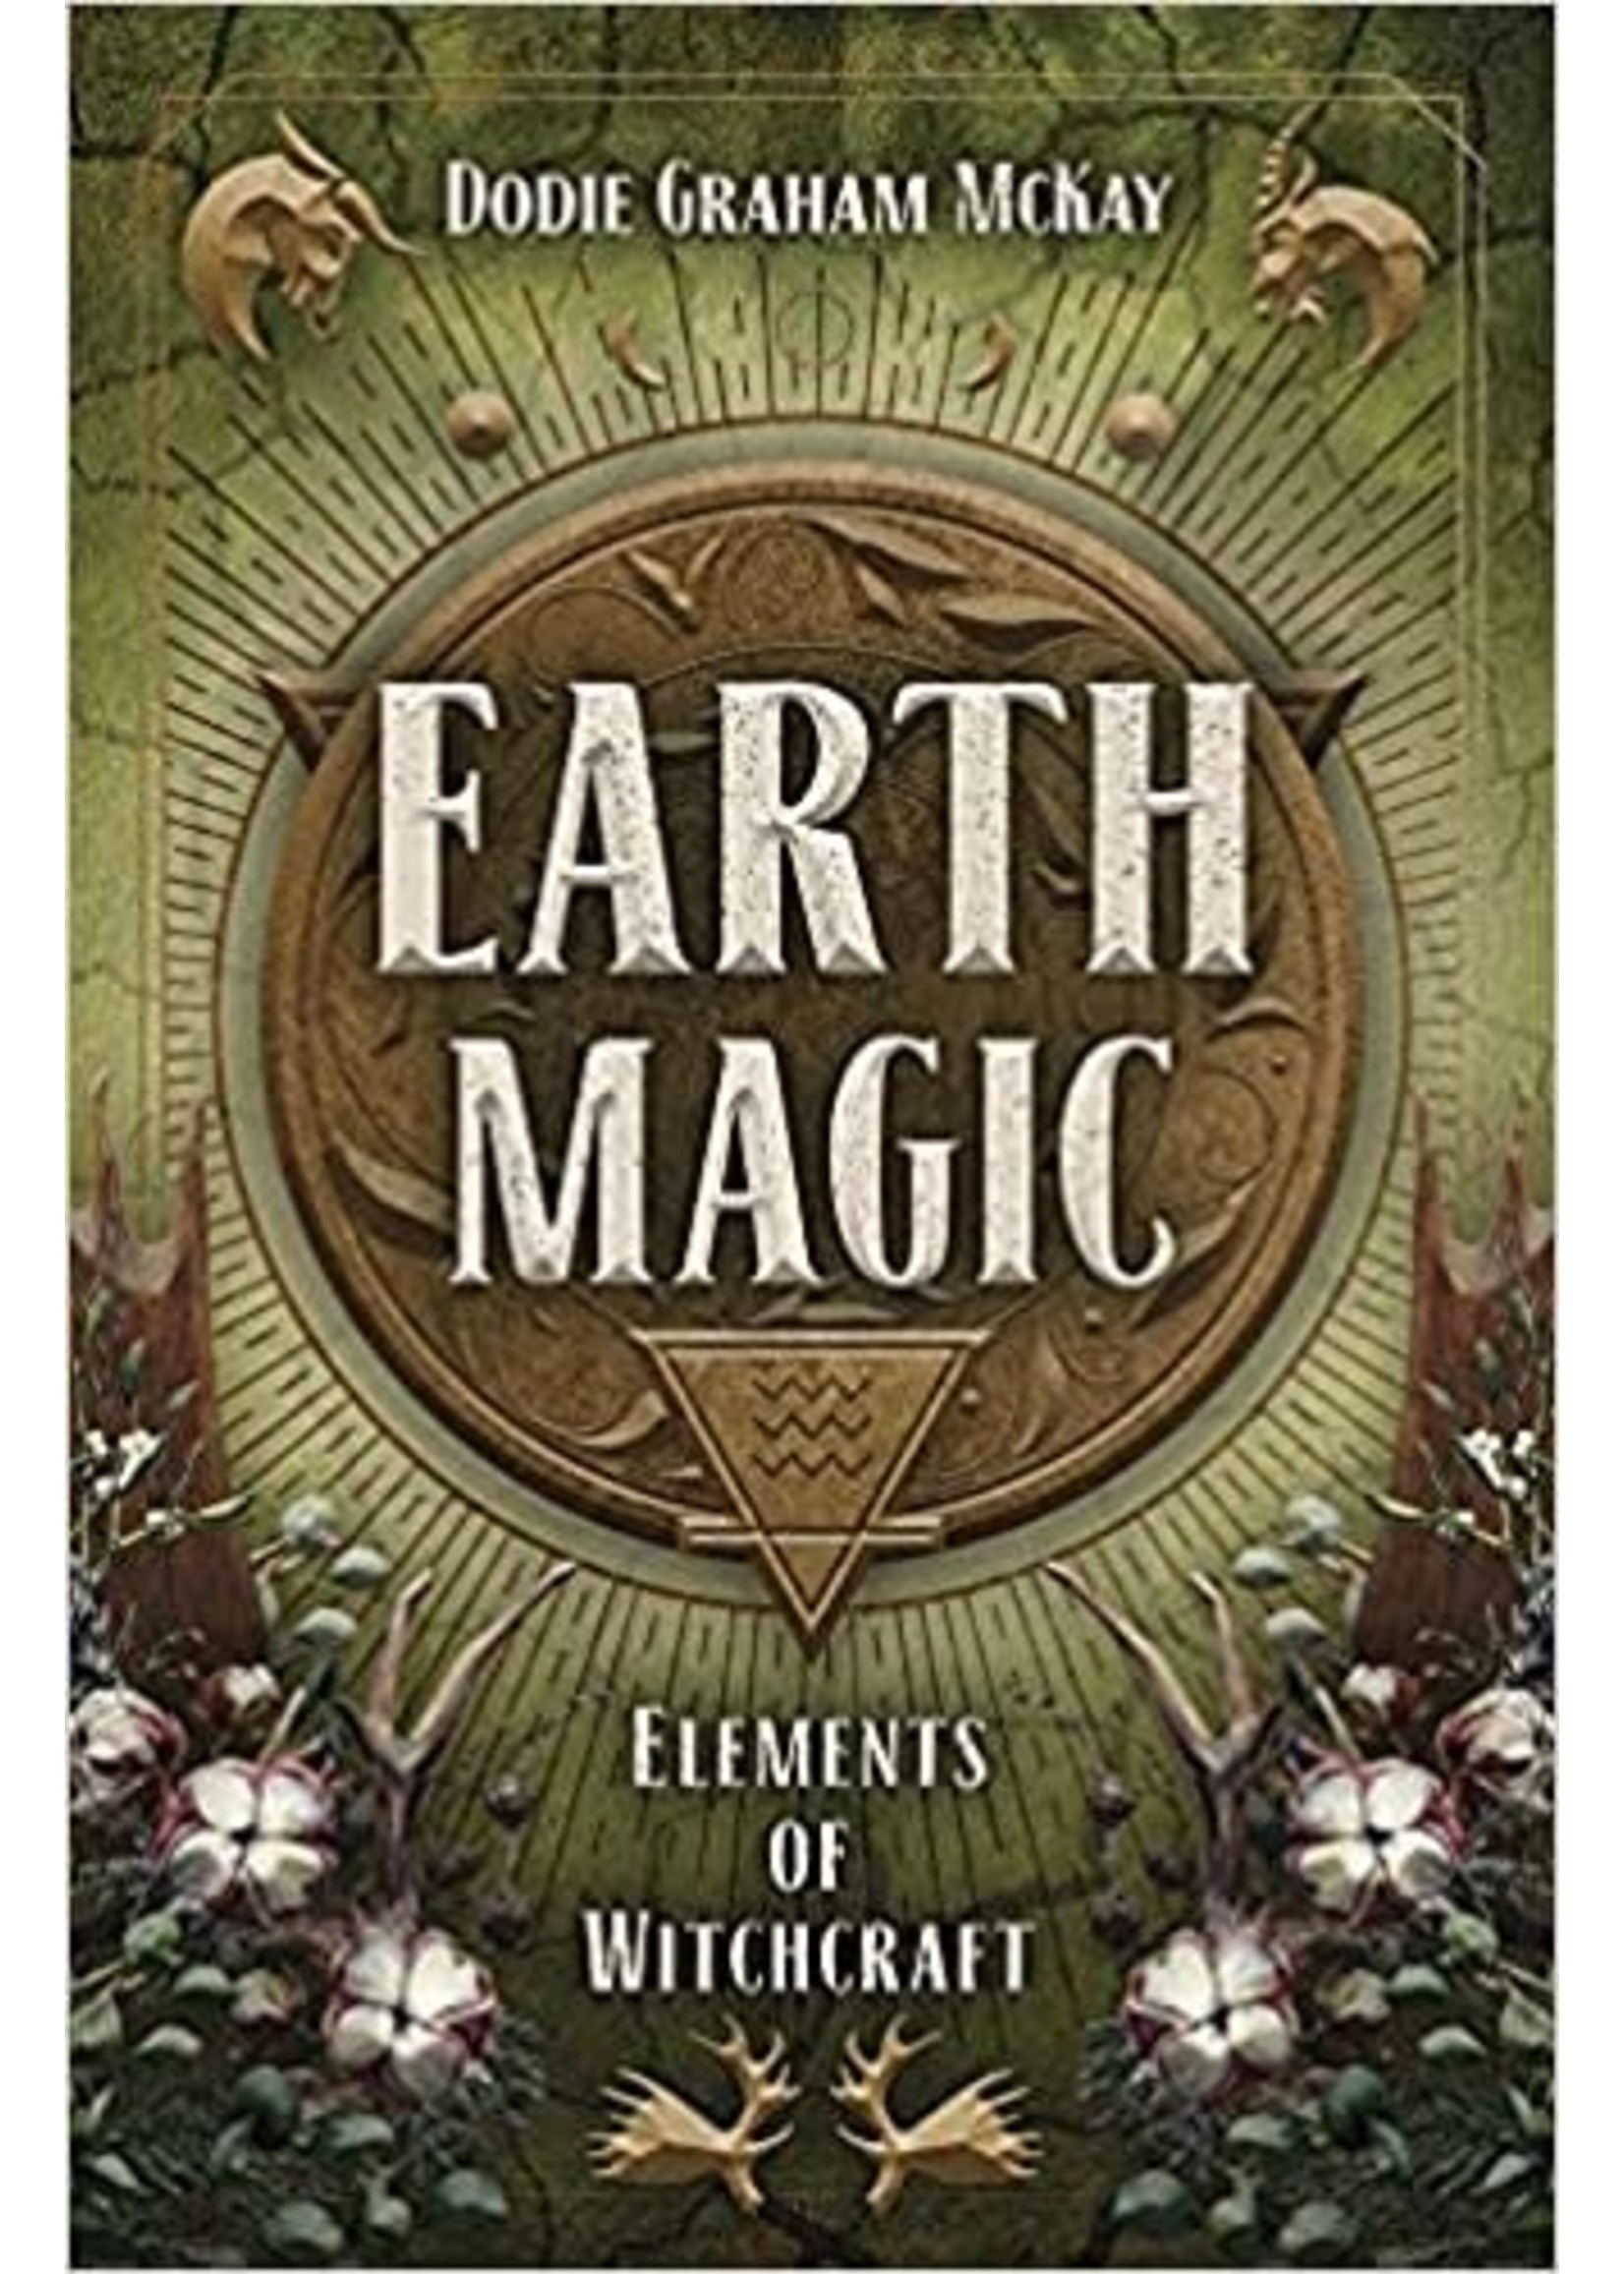 Earth Magic: Elements of Witchcraft by Dodie Graham McKay